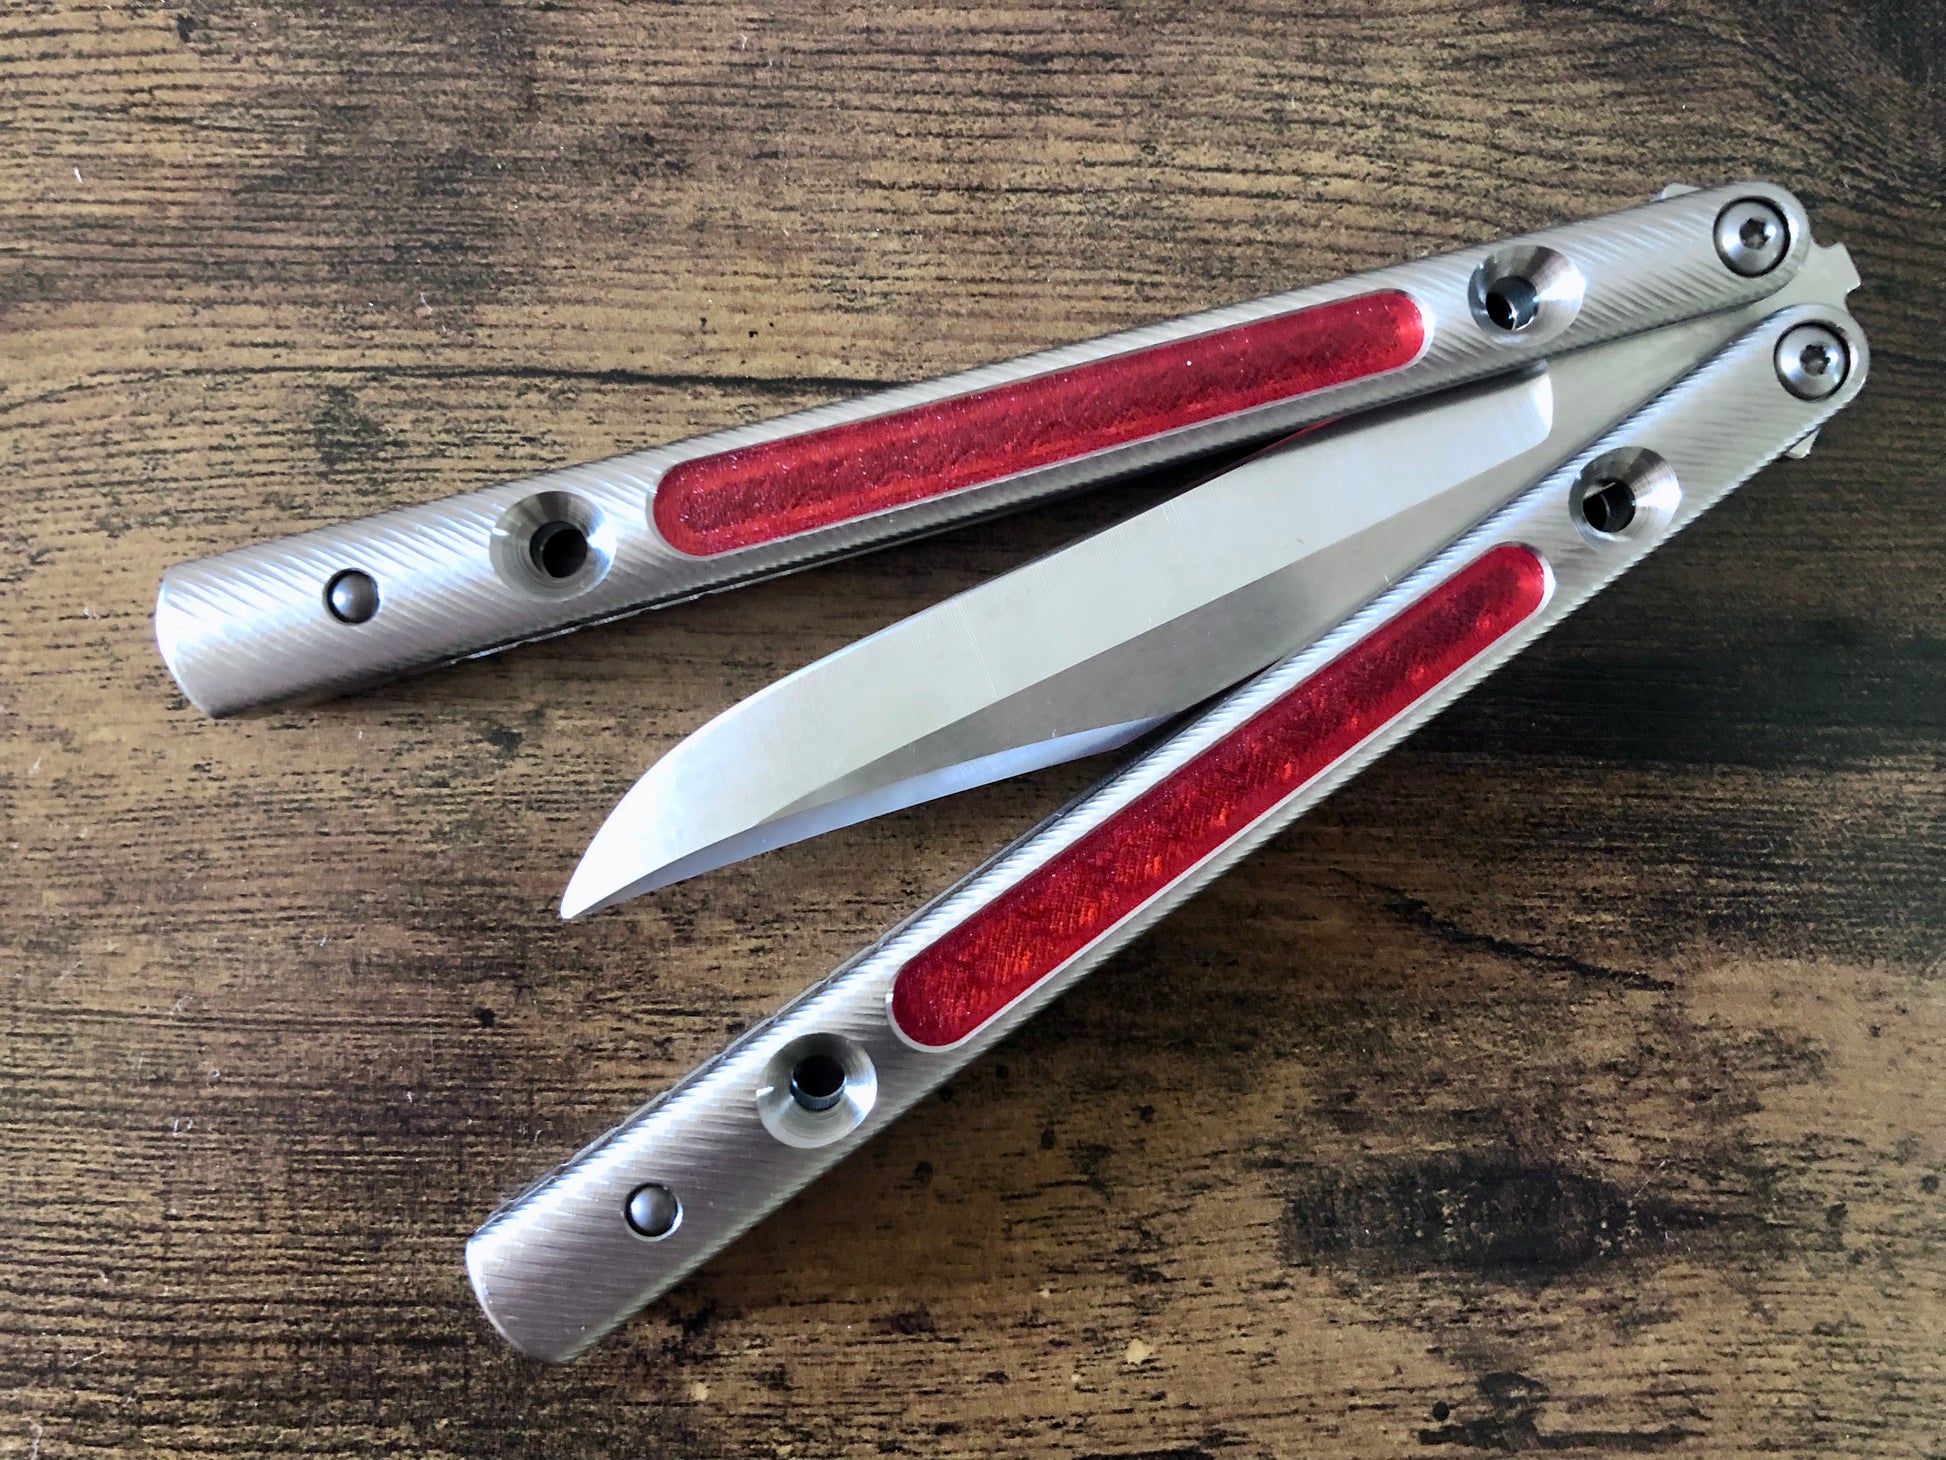 Add grip, comfort, and eliminate ring with these Zippy polyurethane handle inlays designed to fit the titanium Squiggle handles for the Squid Industries Krake Raken balisong.